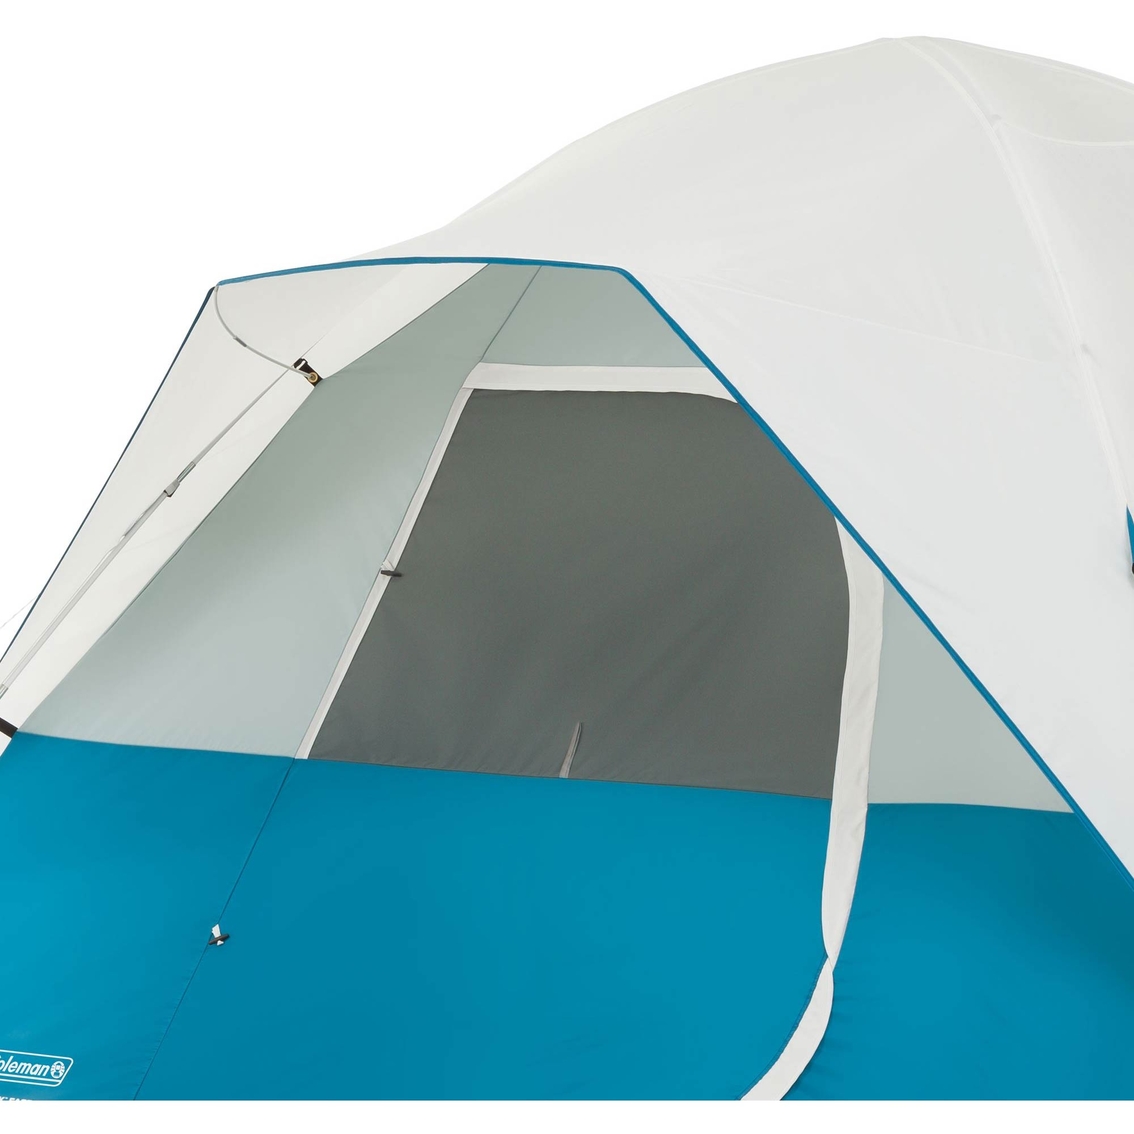 Coleman Longs Peak Fast Pitch Dome Tent - Image 3 of 4